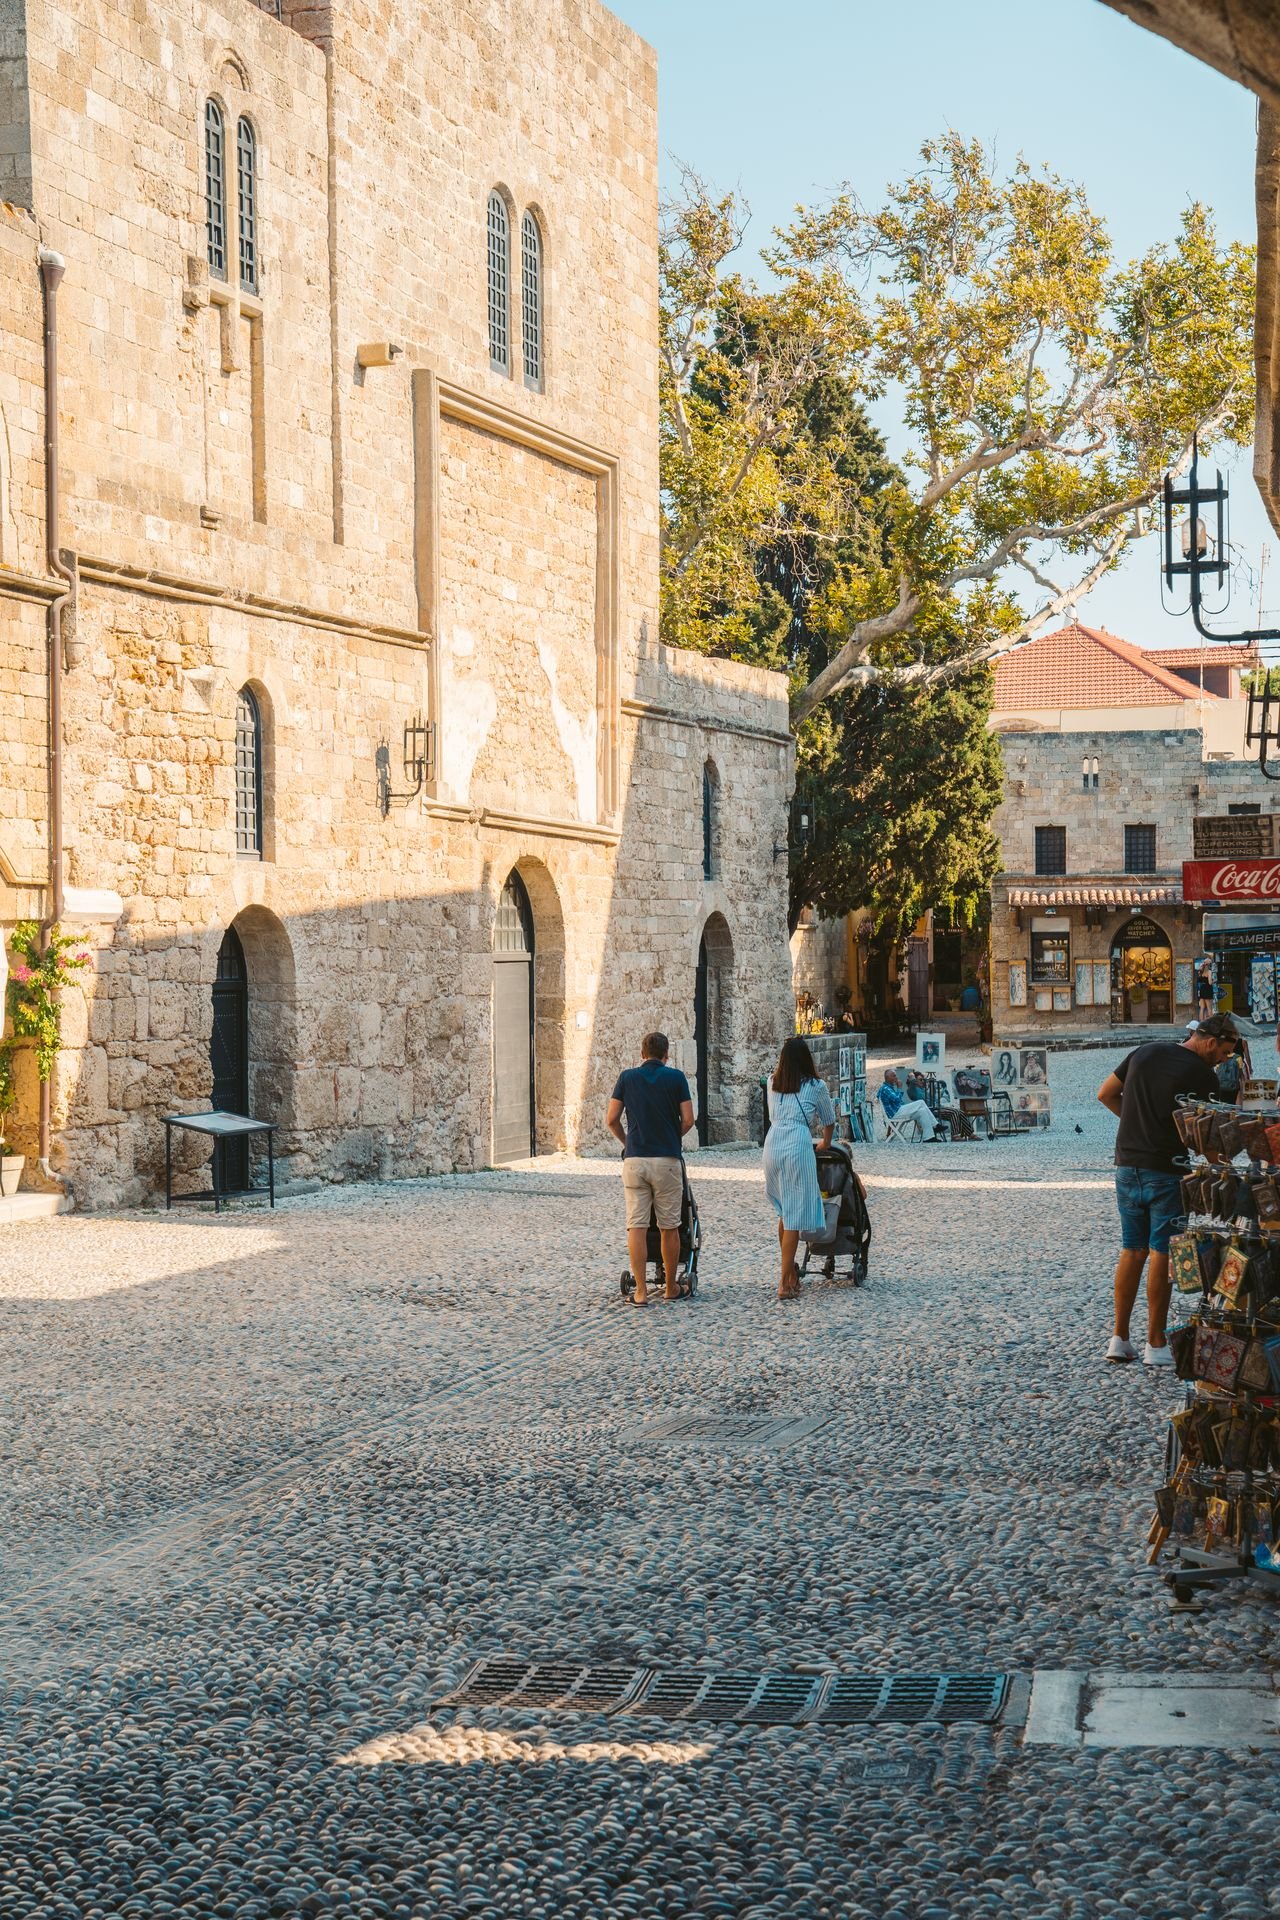 You will find many shops around Hippokratous Square in Rhodes